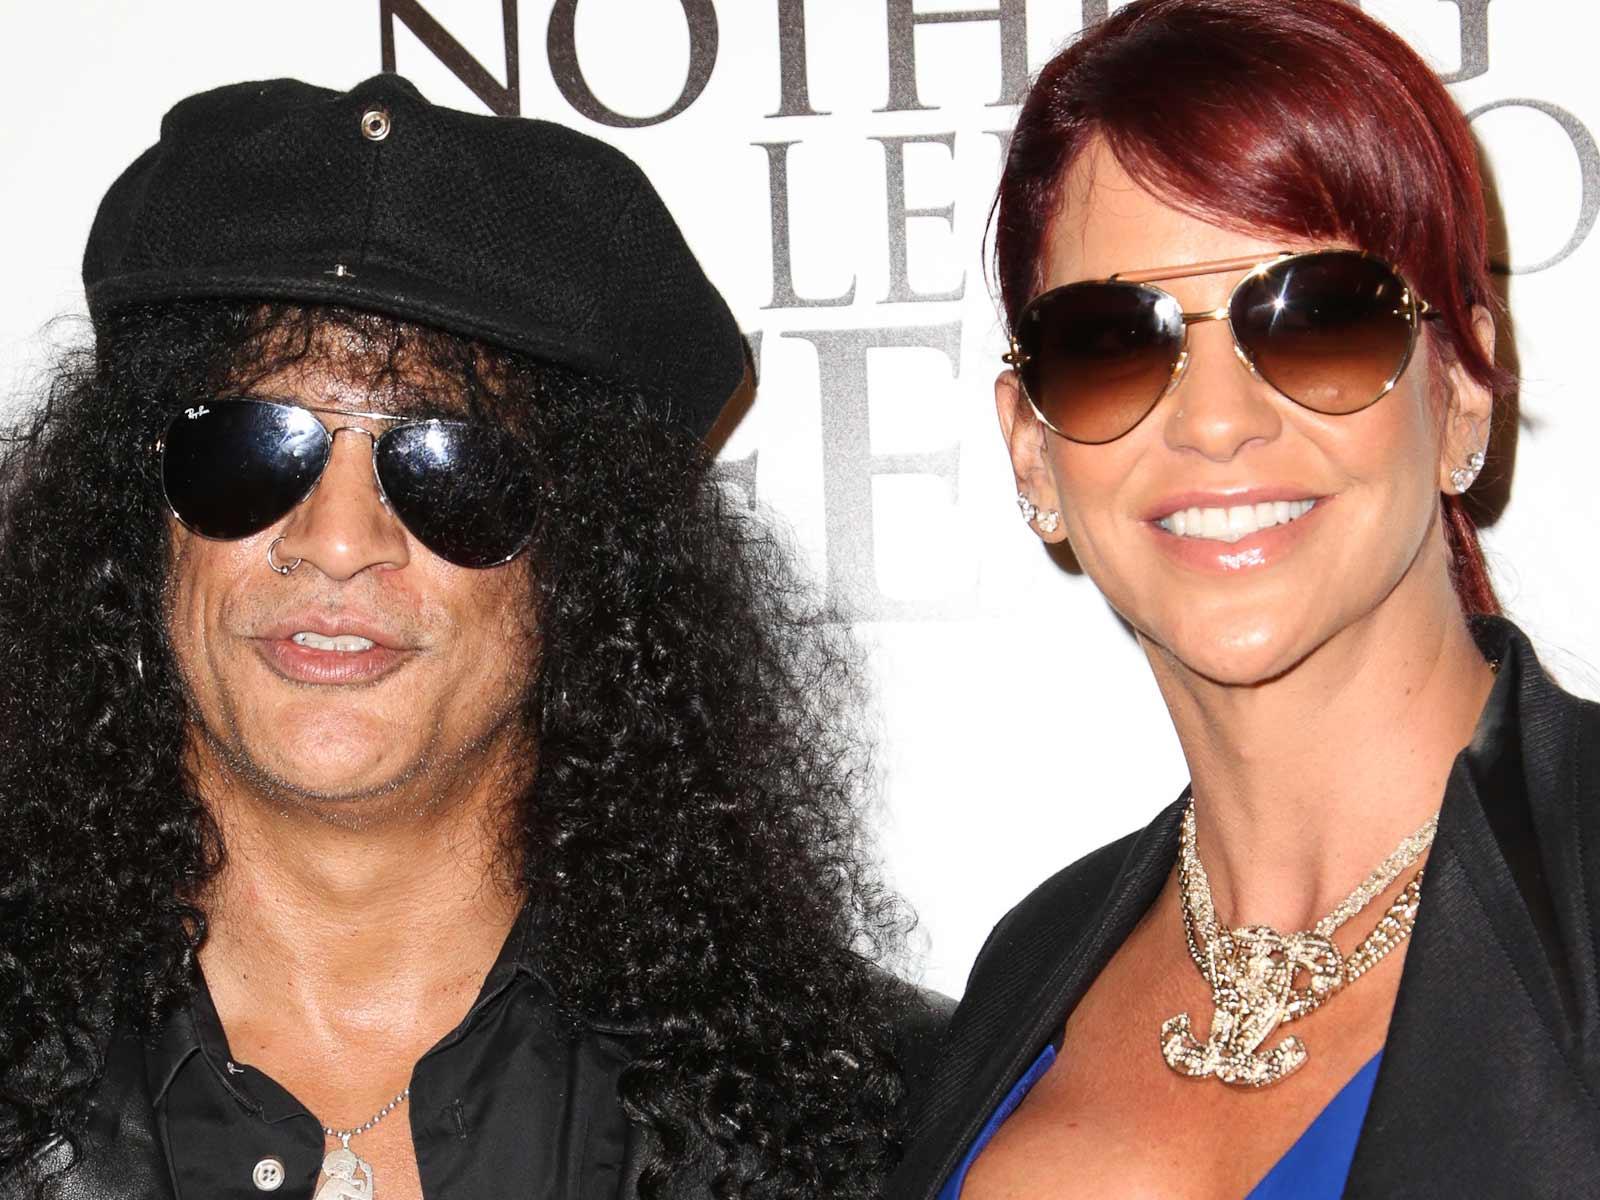 Slash to Pay Ex-Wife Over $6 Million in Divorce Settlement, Plus $100k a Month in Spousal Support